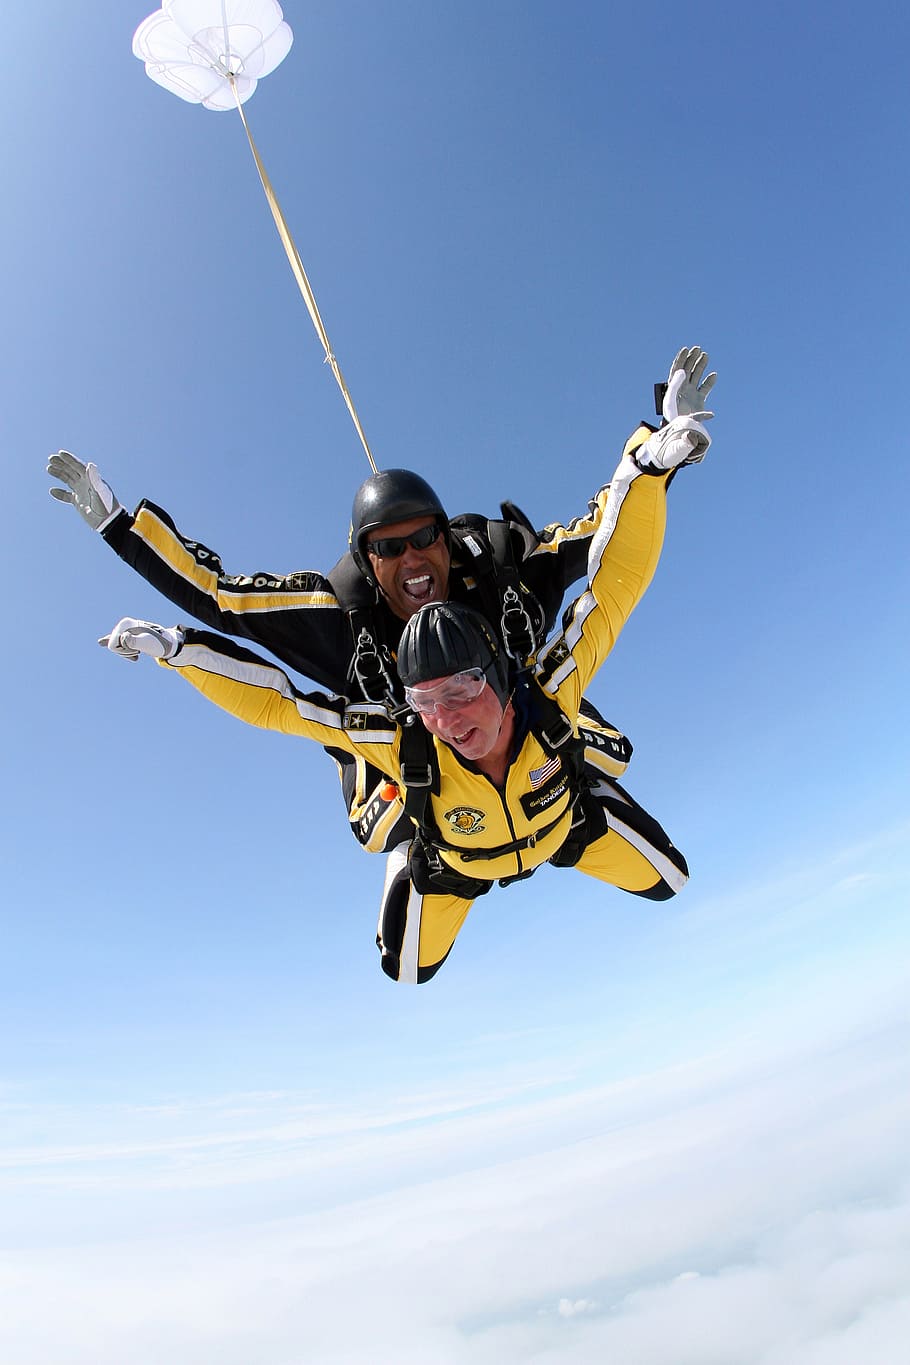 man, woman, wearing, yellow, suit, riding, parachute, clouds, tandem skydivers, skydivers